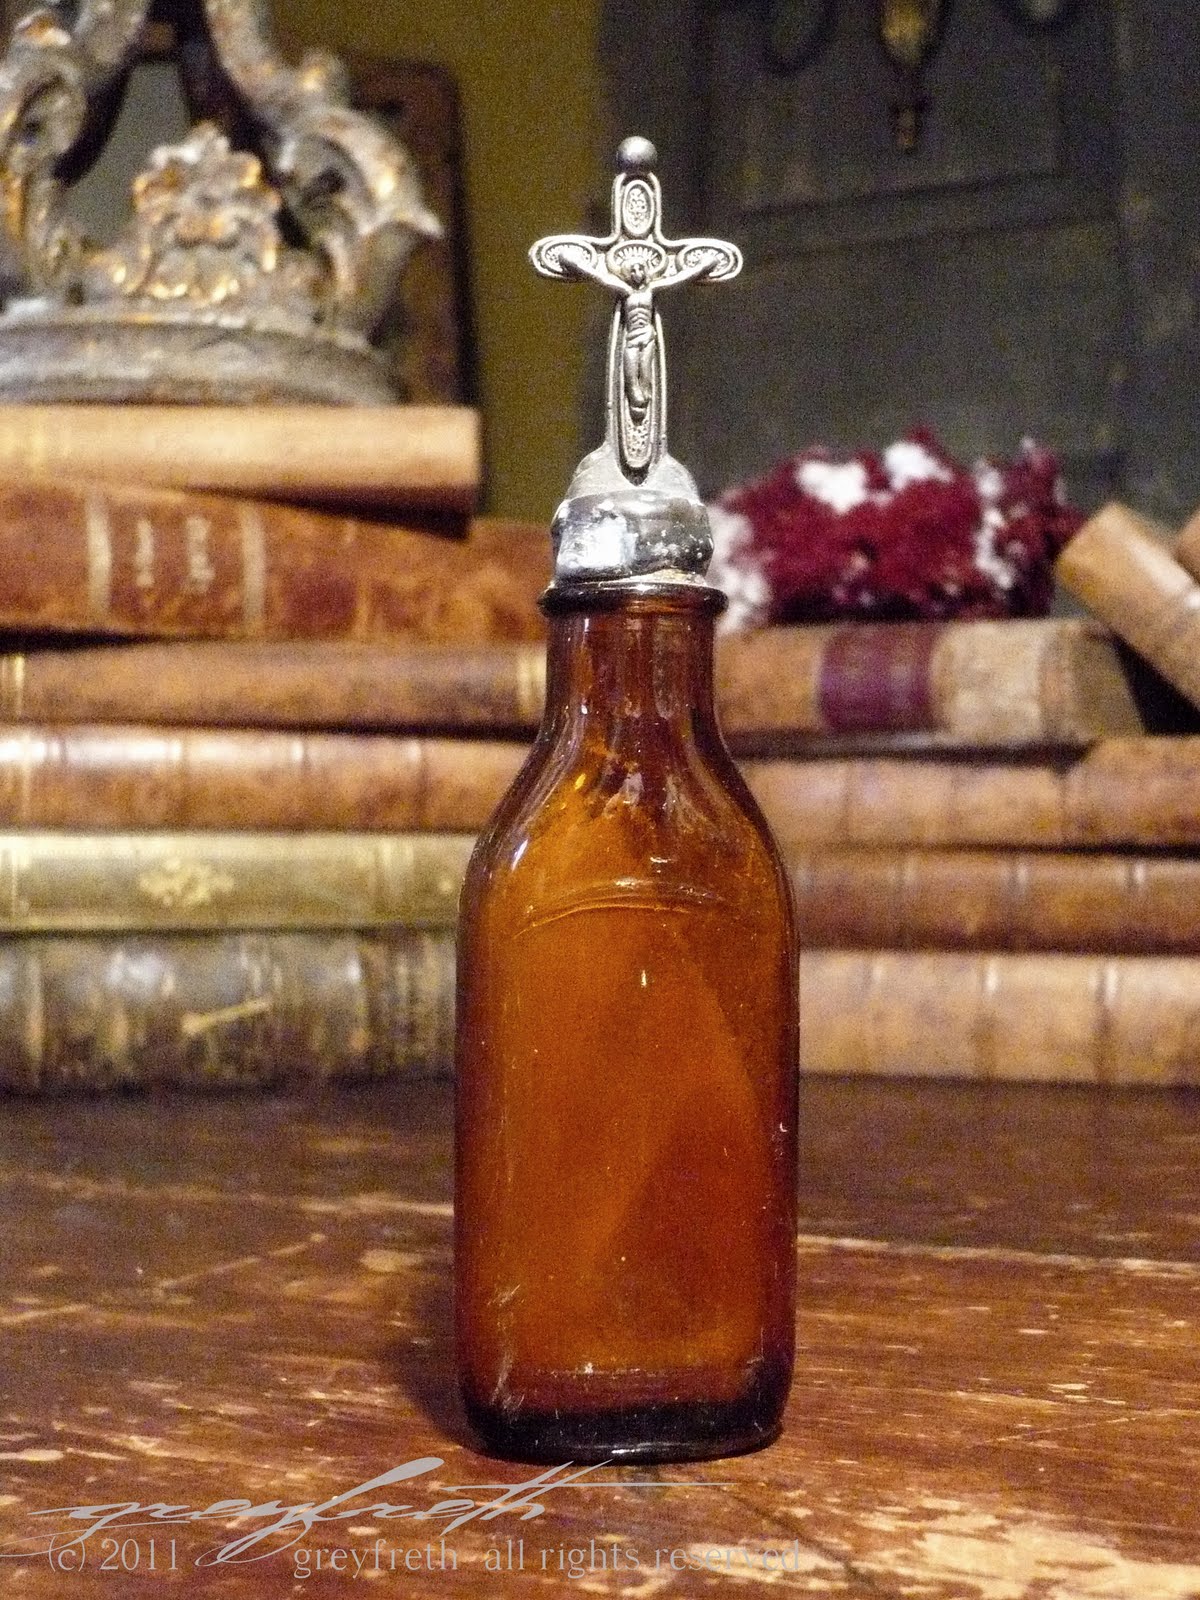 Greyfreth Cross Bottles--The Amber Collection--